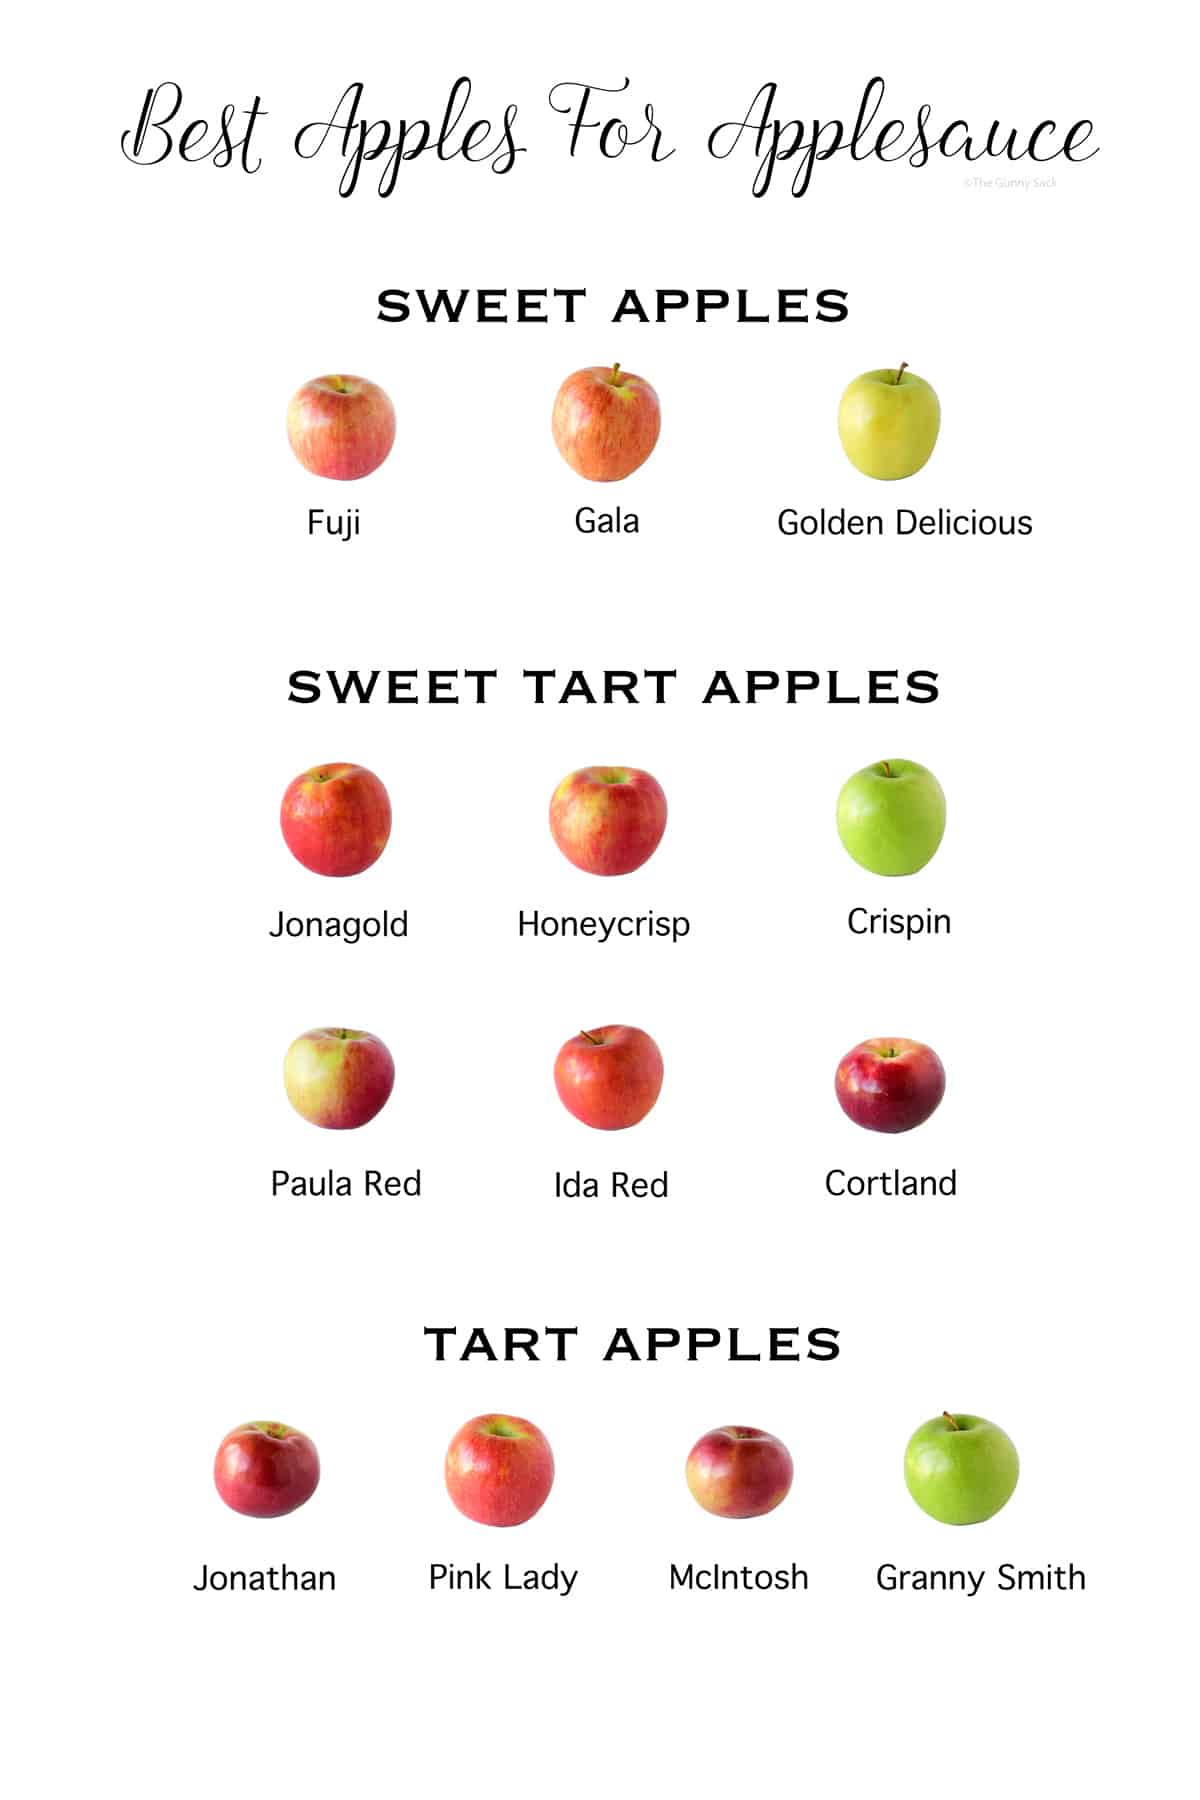 best apples for applesauce graphic.